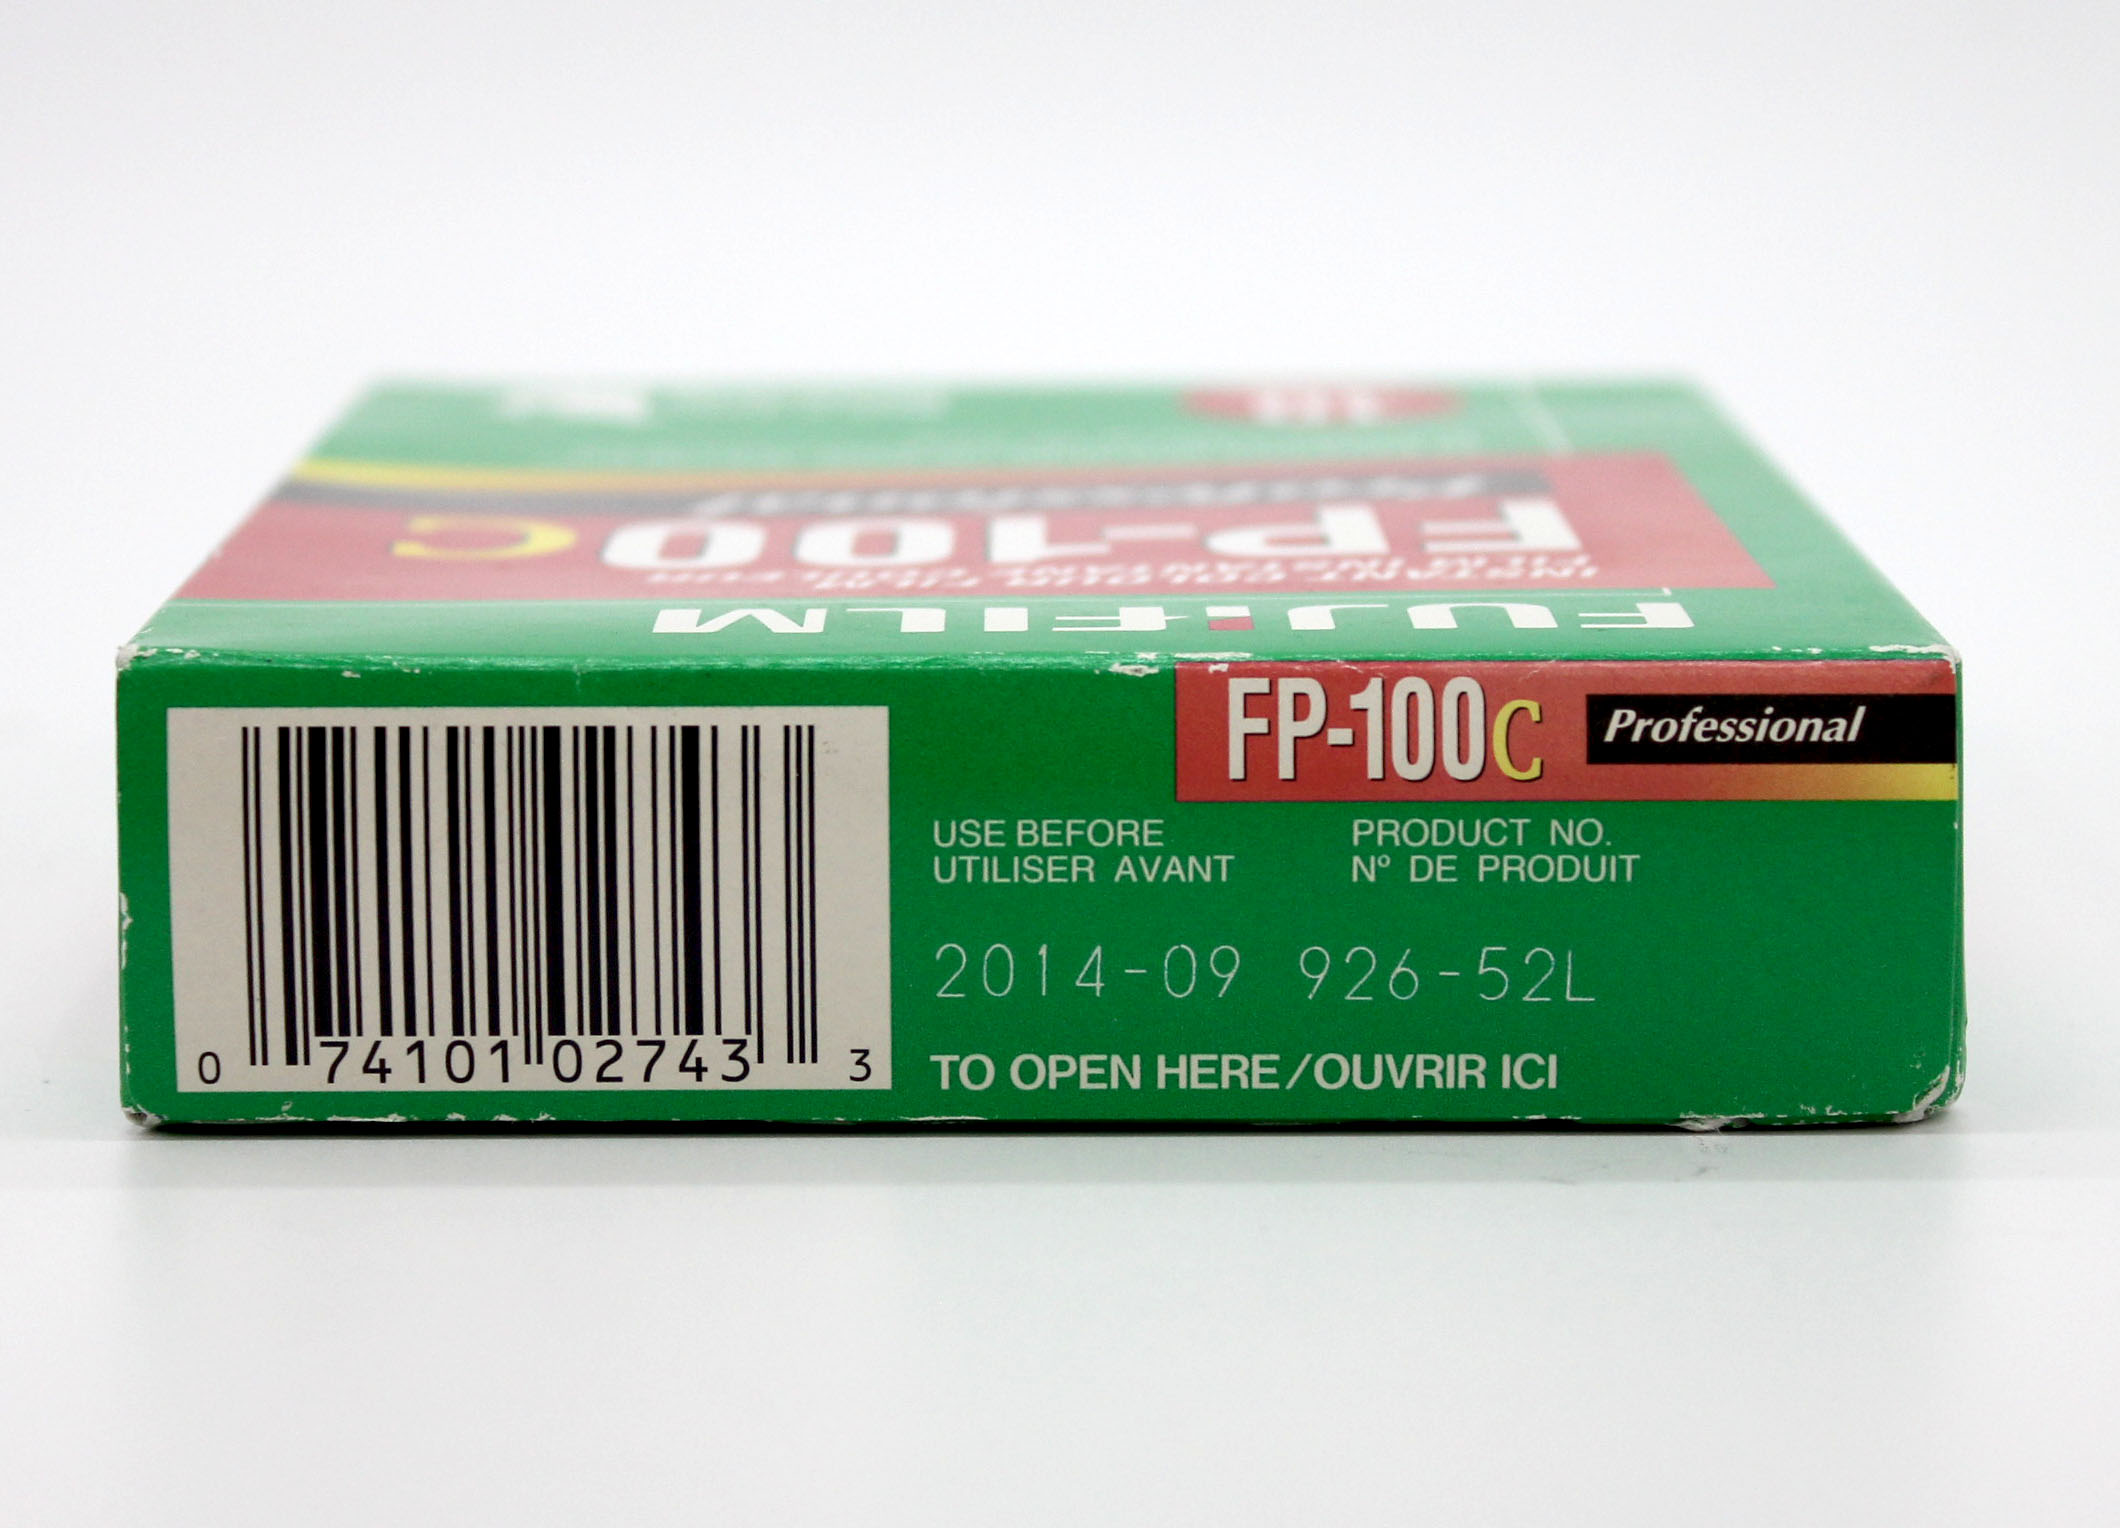  Fujifilm FP-100C Professional Instant Color Film (Exp 2014) from Japan Photo 3